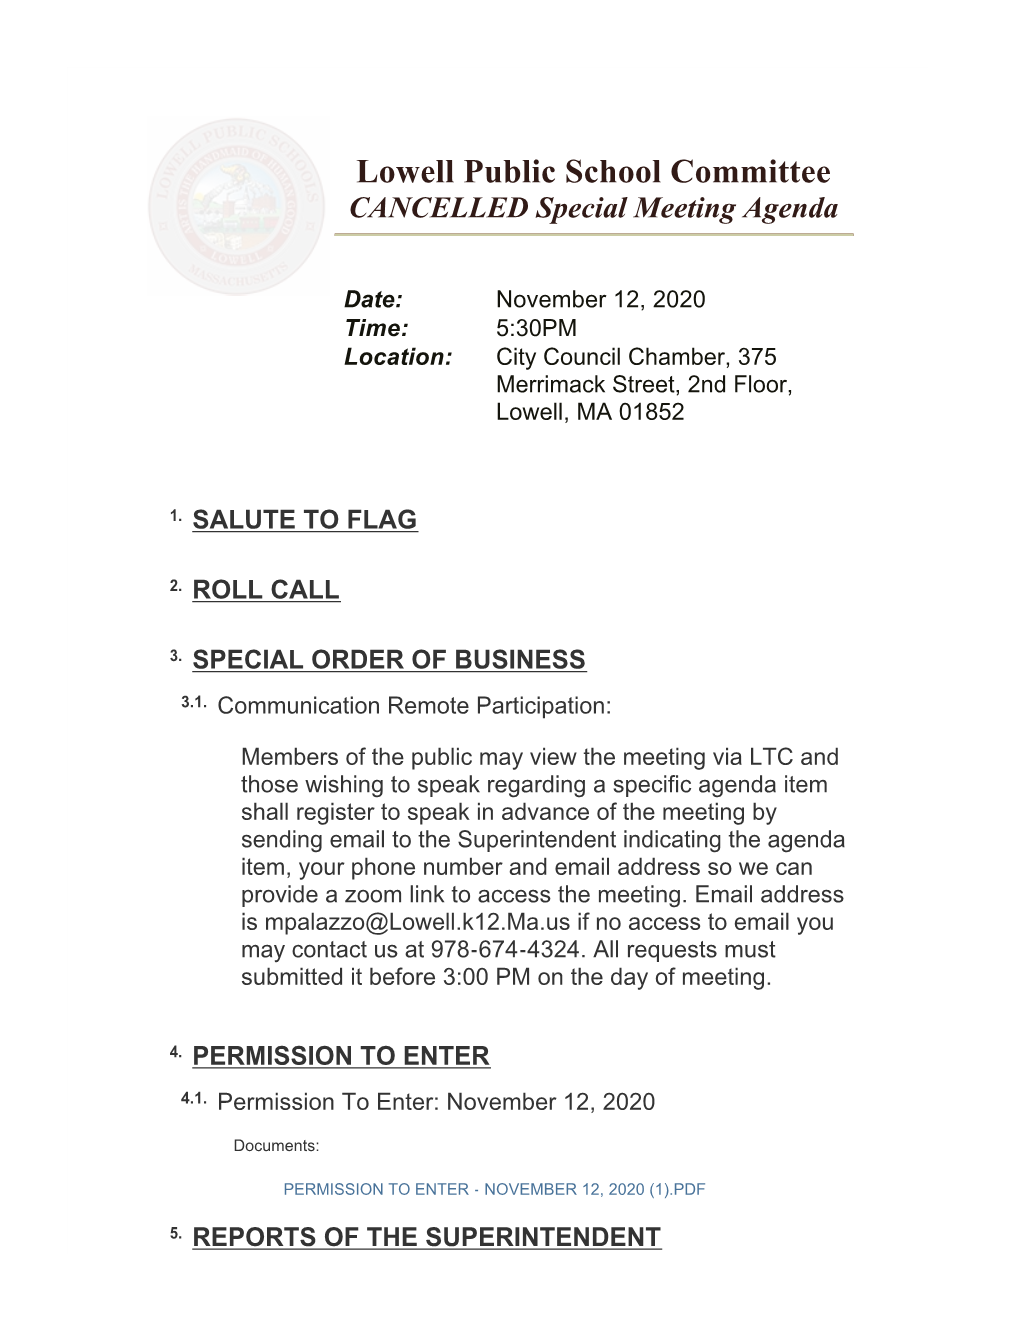 Lowell Public School Committee CANCELLED Special Meeting Agenda